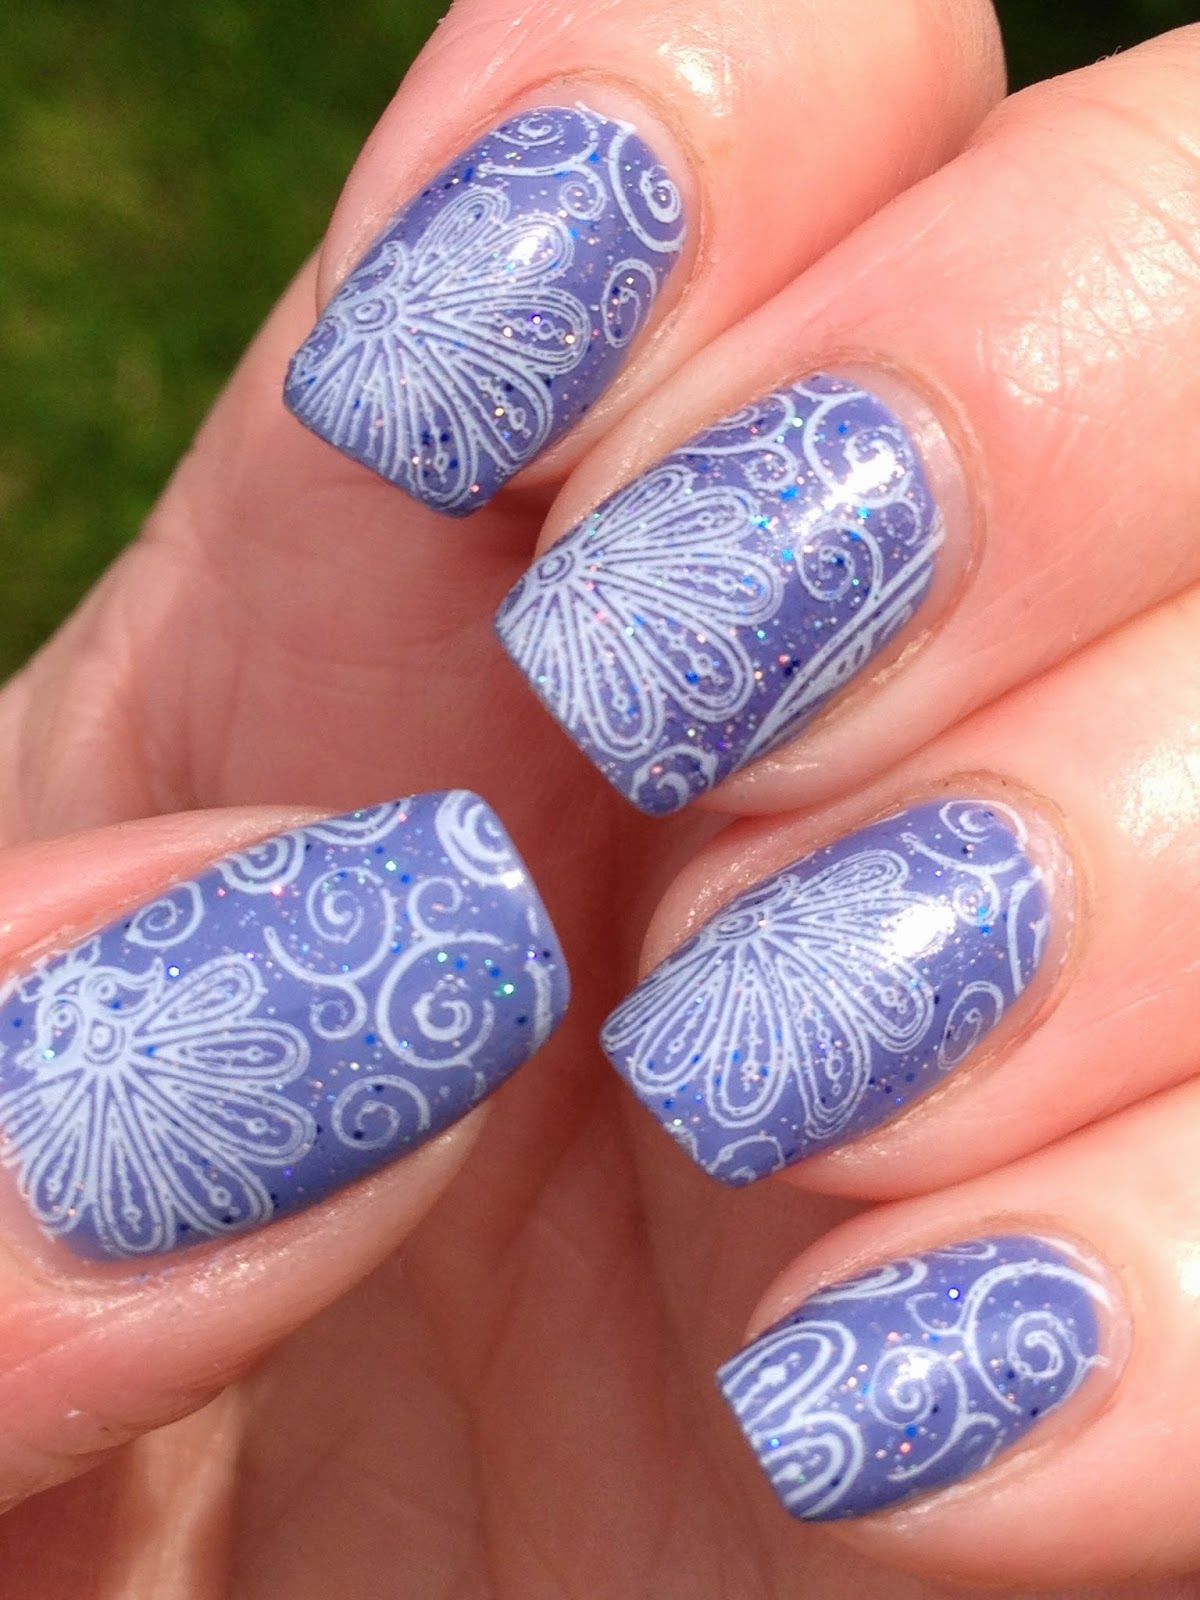 Glam Doll Periwinkle stamped with LS-13 | Nails | Pinterest | Glam ...